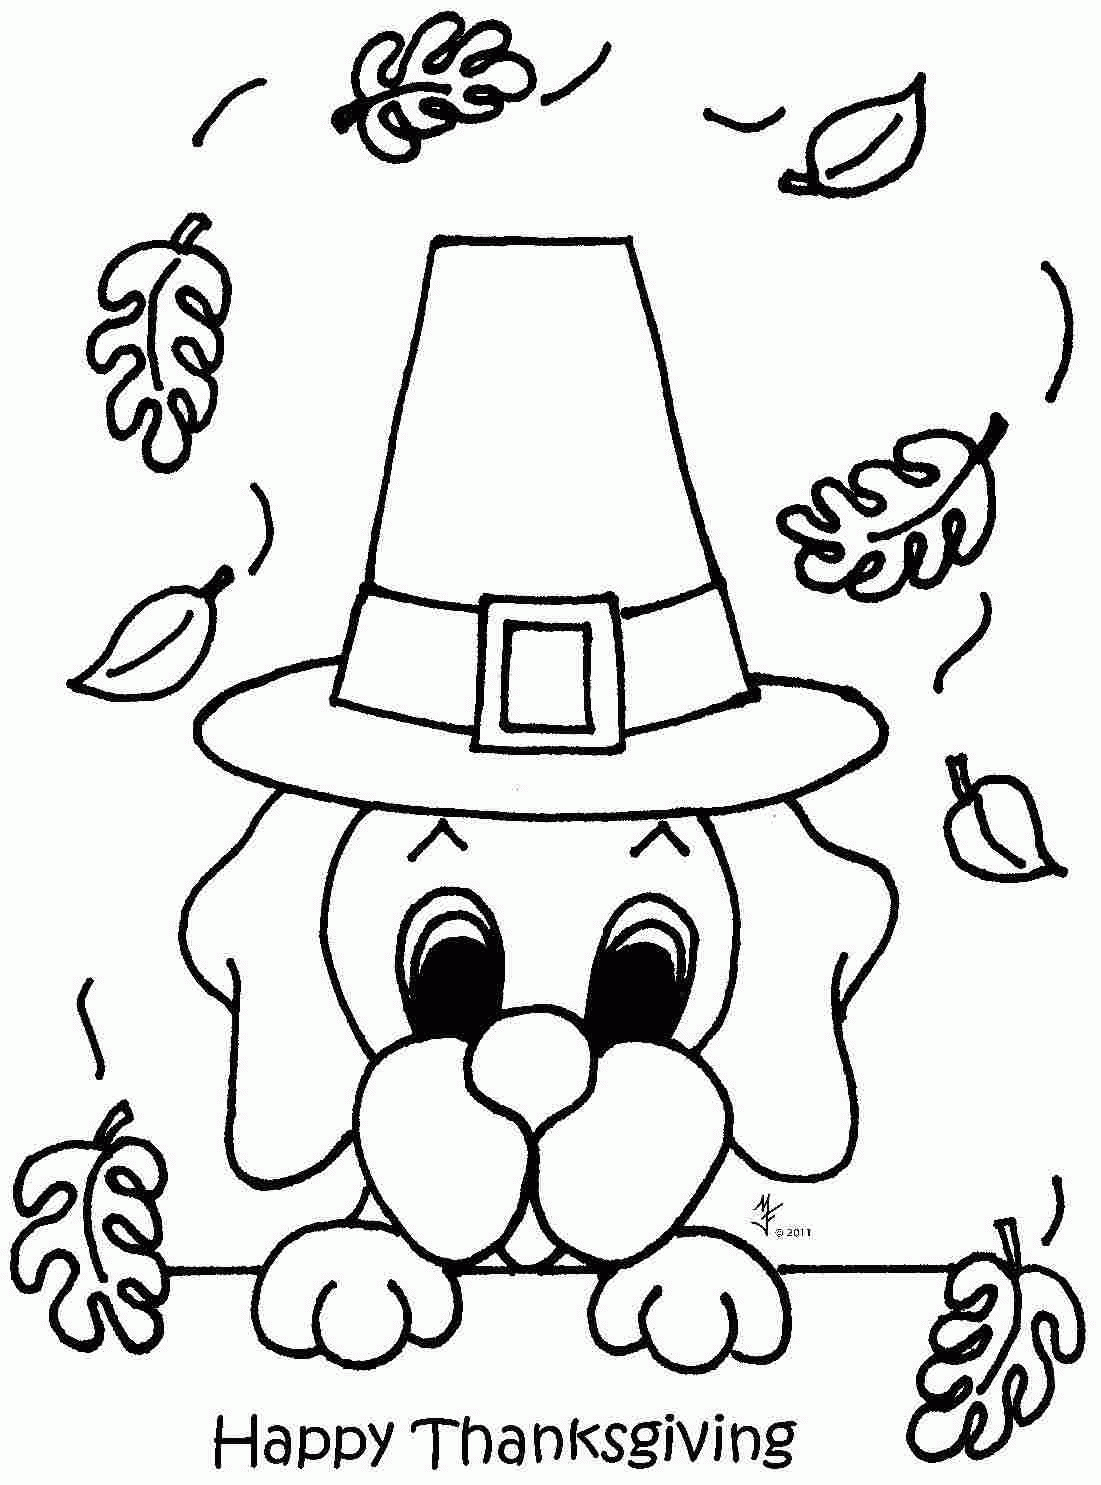 Coloring pages happy thanksgiving coloring picture